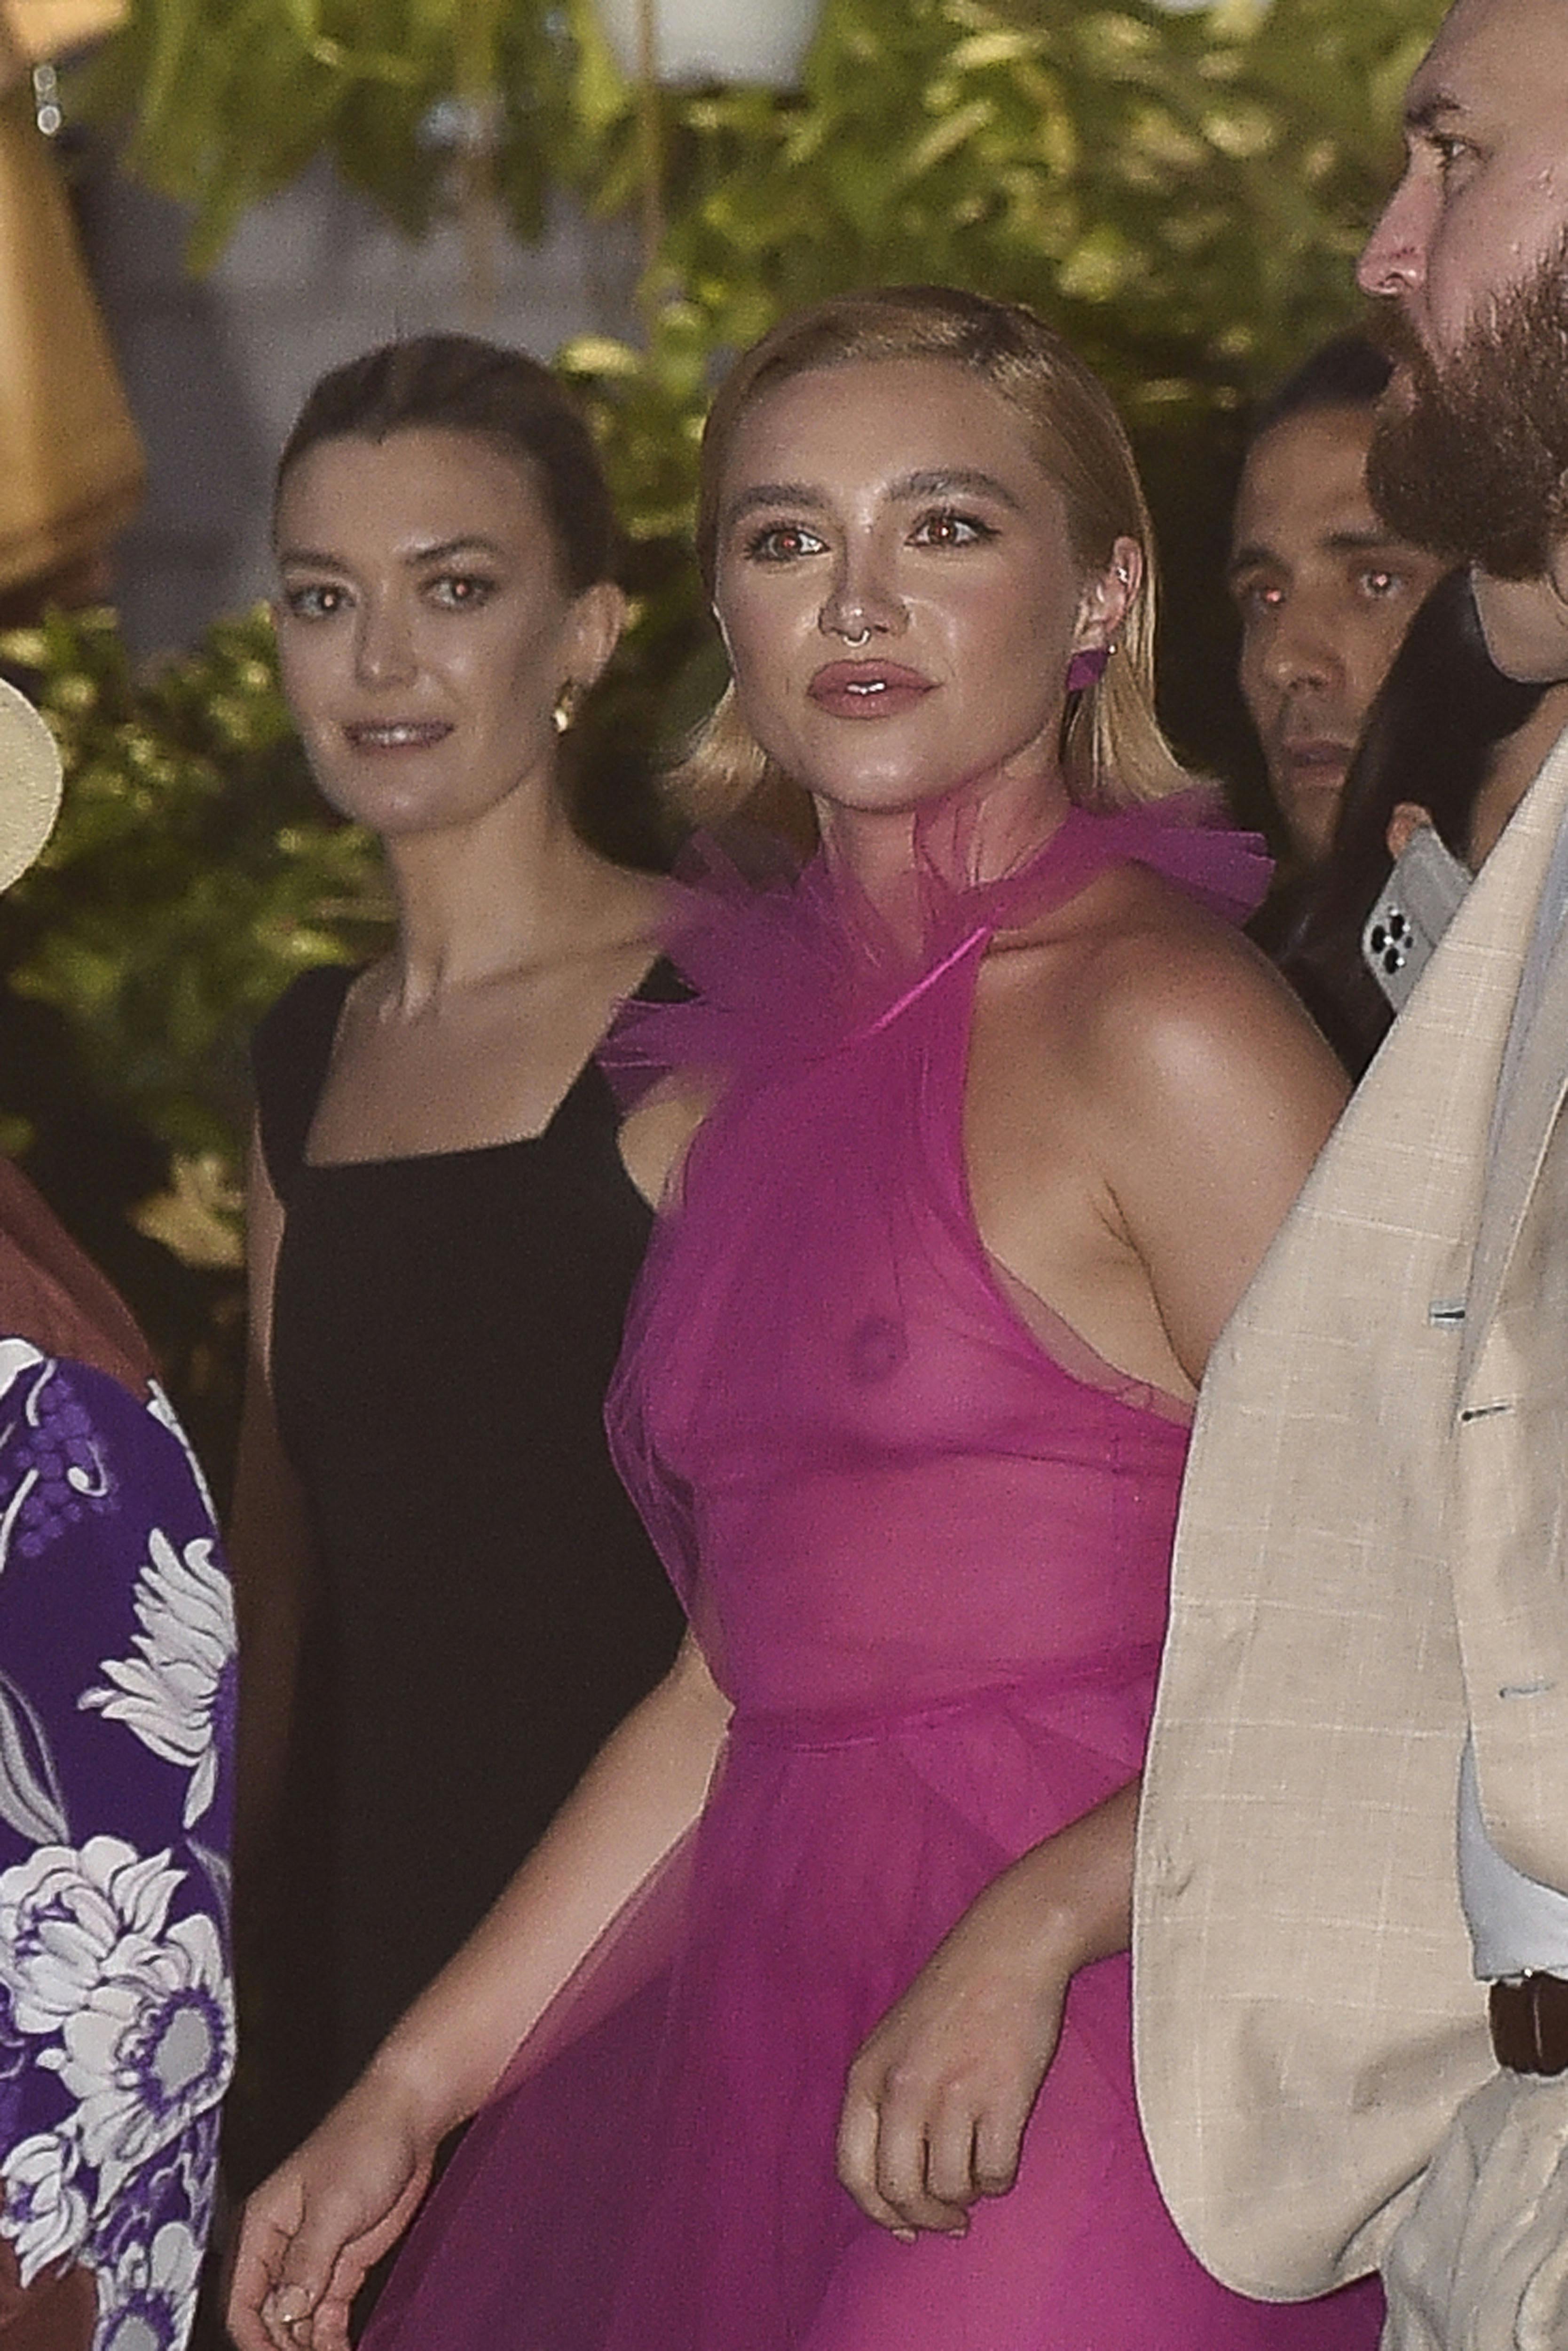 Florence Pugh stuns in a see-through pink outfit while attending Valentino Haute Couture show "Valentino - The beginning" in Rome. 08 Jul 2022 Pictured: Florence Pugh. Photo credit: MEGA TheMegaAgency.com +1 888 505 6342 (Mega Agency TagID: MEGA876041_007.jpg) [Photo via Mega Agency]